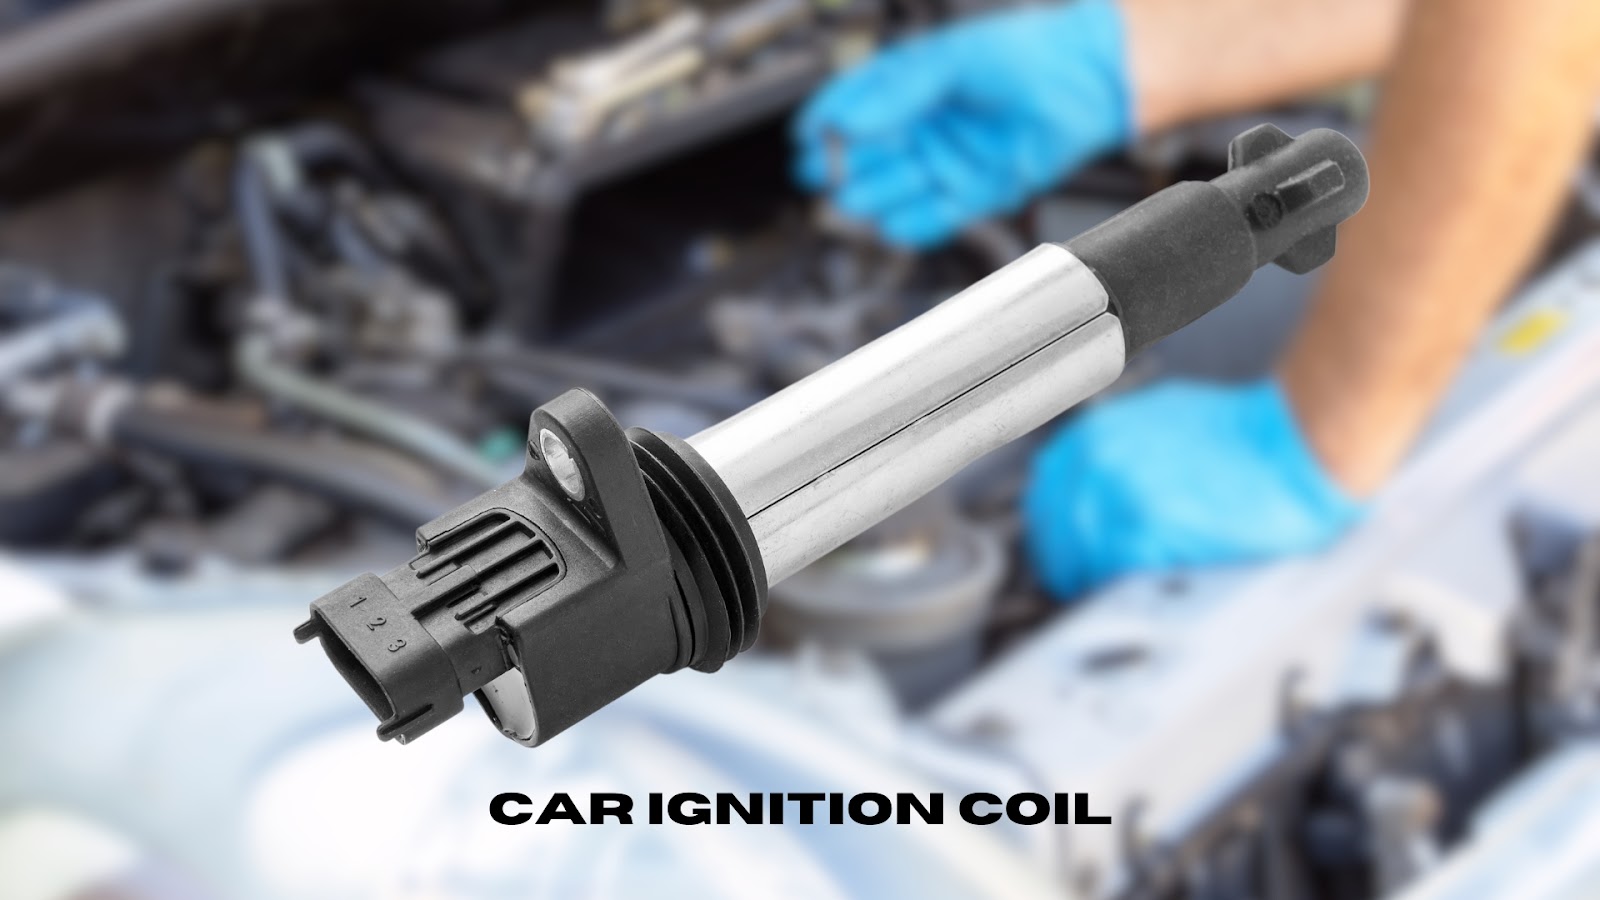 A car ignition coil